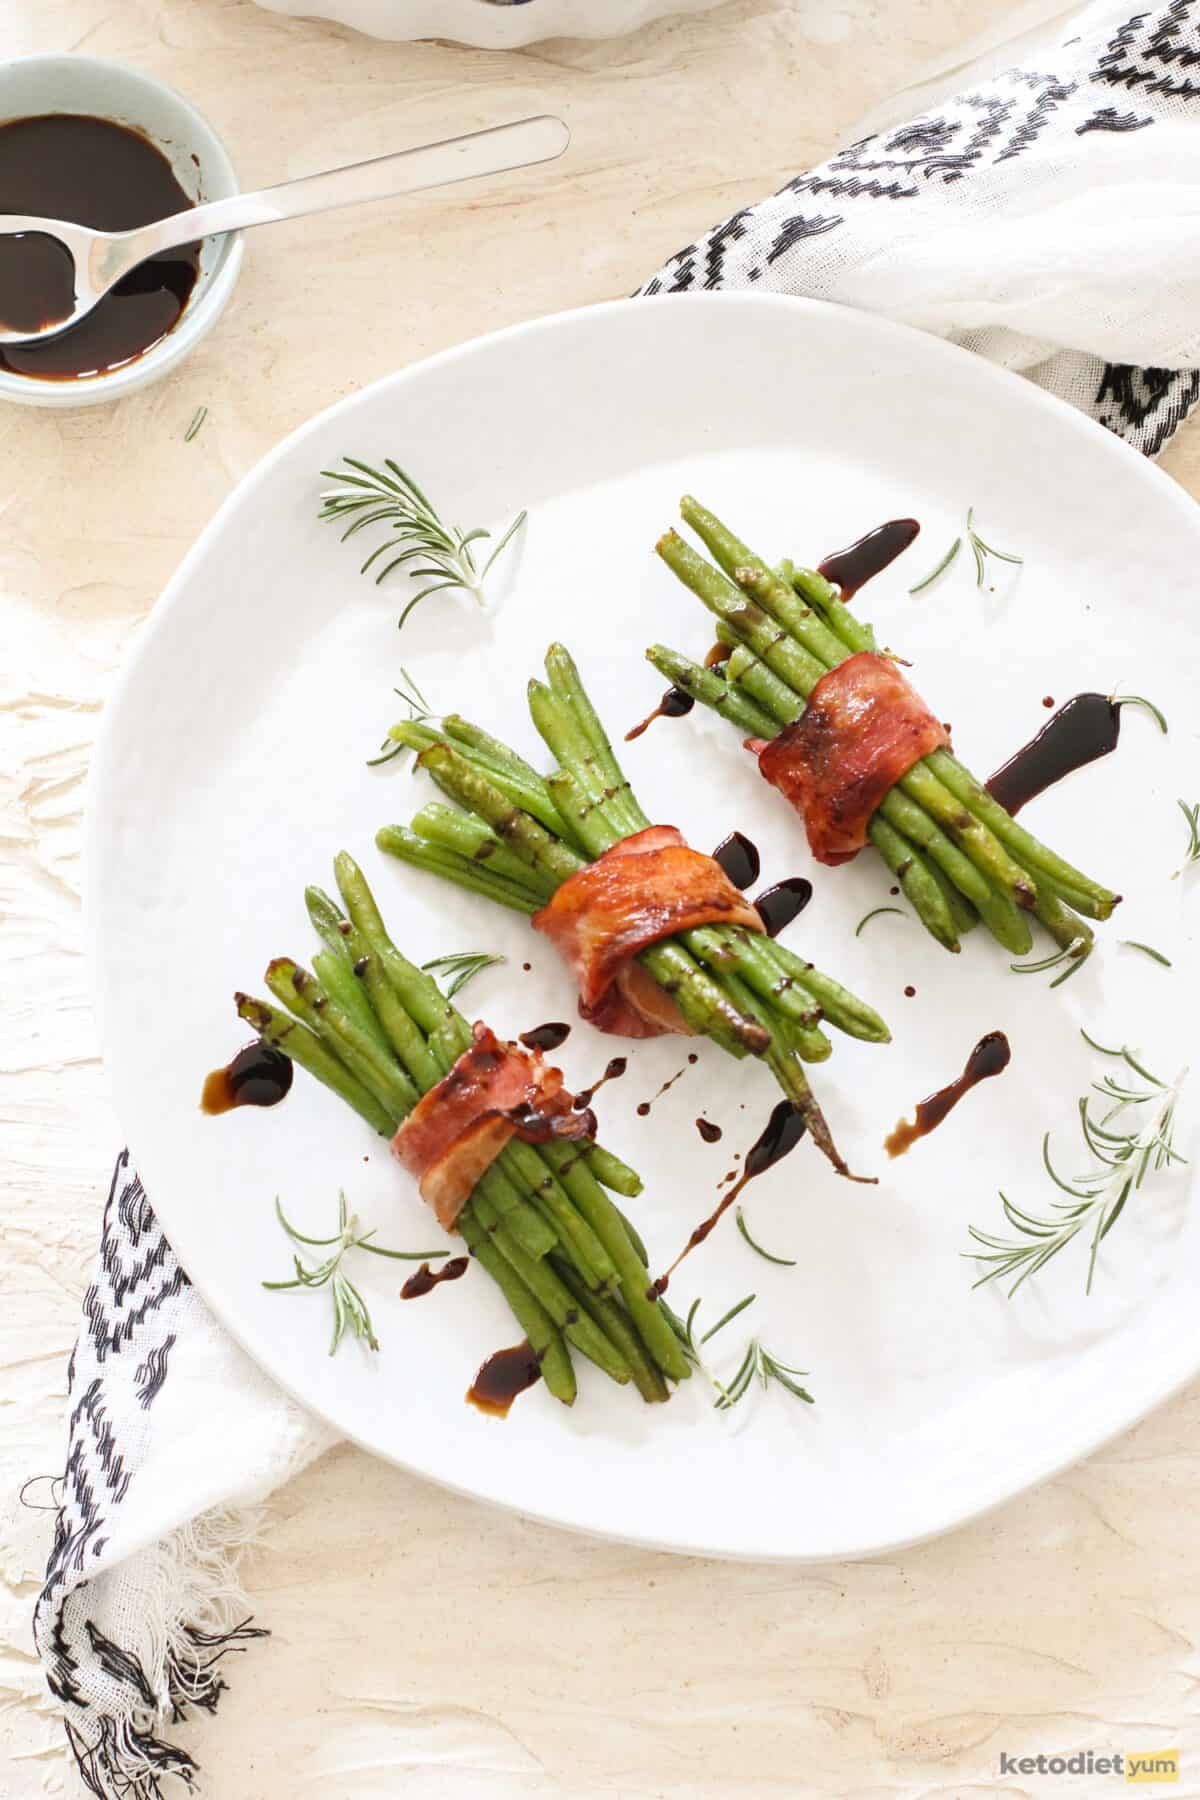 3 bundles of bacon wrapped green beans drizzled with balsamic vinegar and served on a white plate